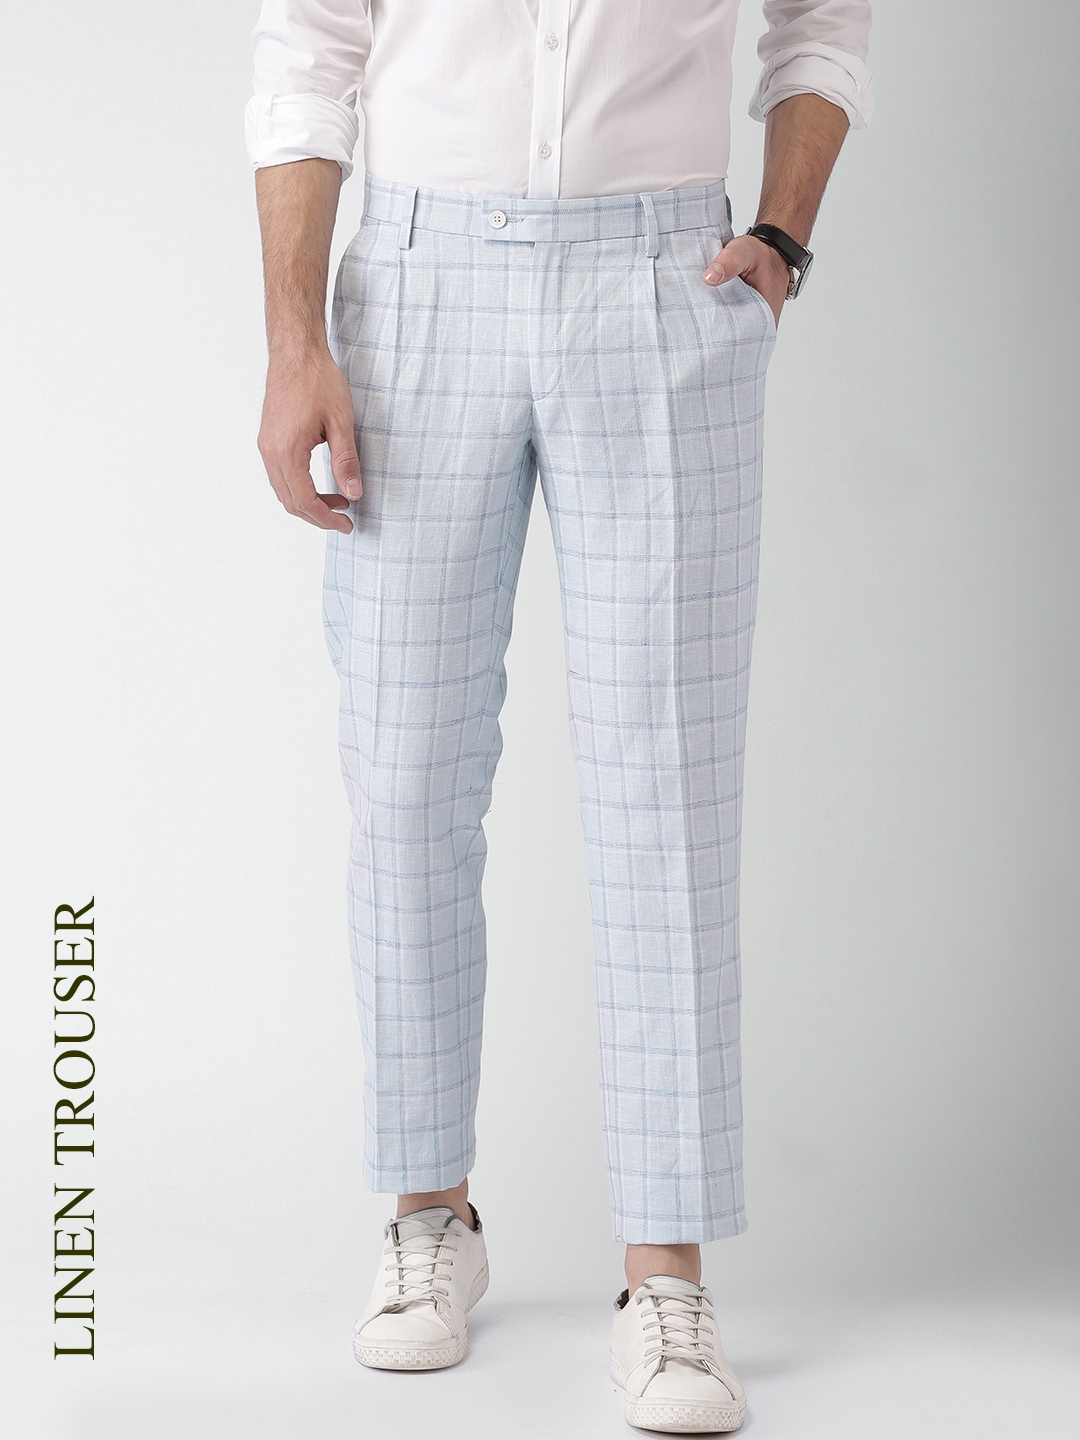 Buy INVICTUS Men Blue  White Checked Slim Fit Pleated Formal Trousers   Trousers for Men 1745332  Myntra